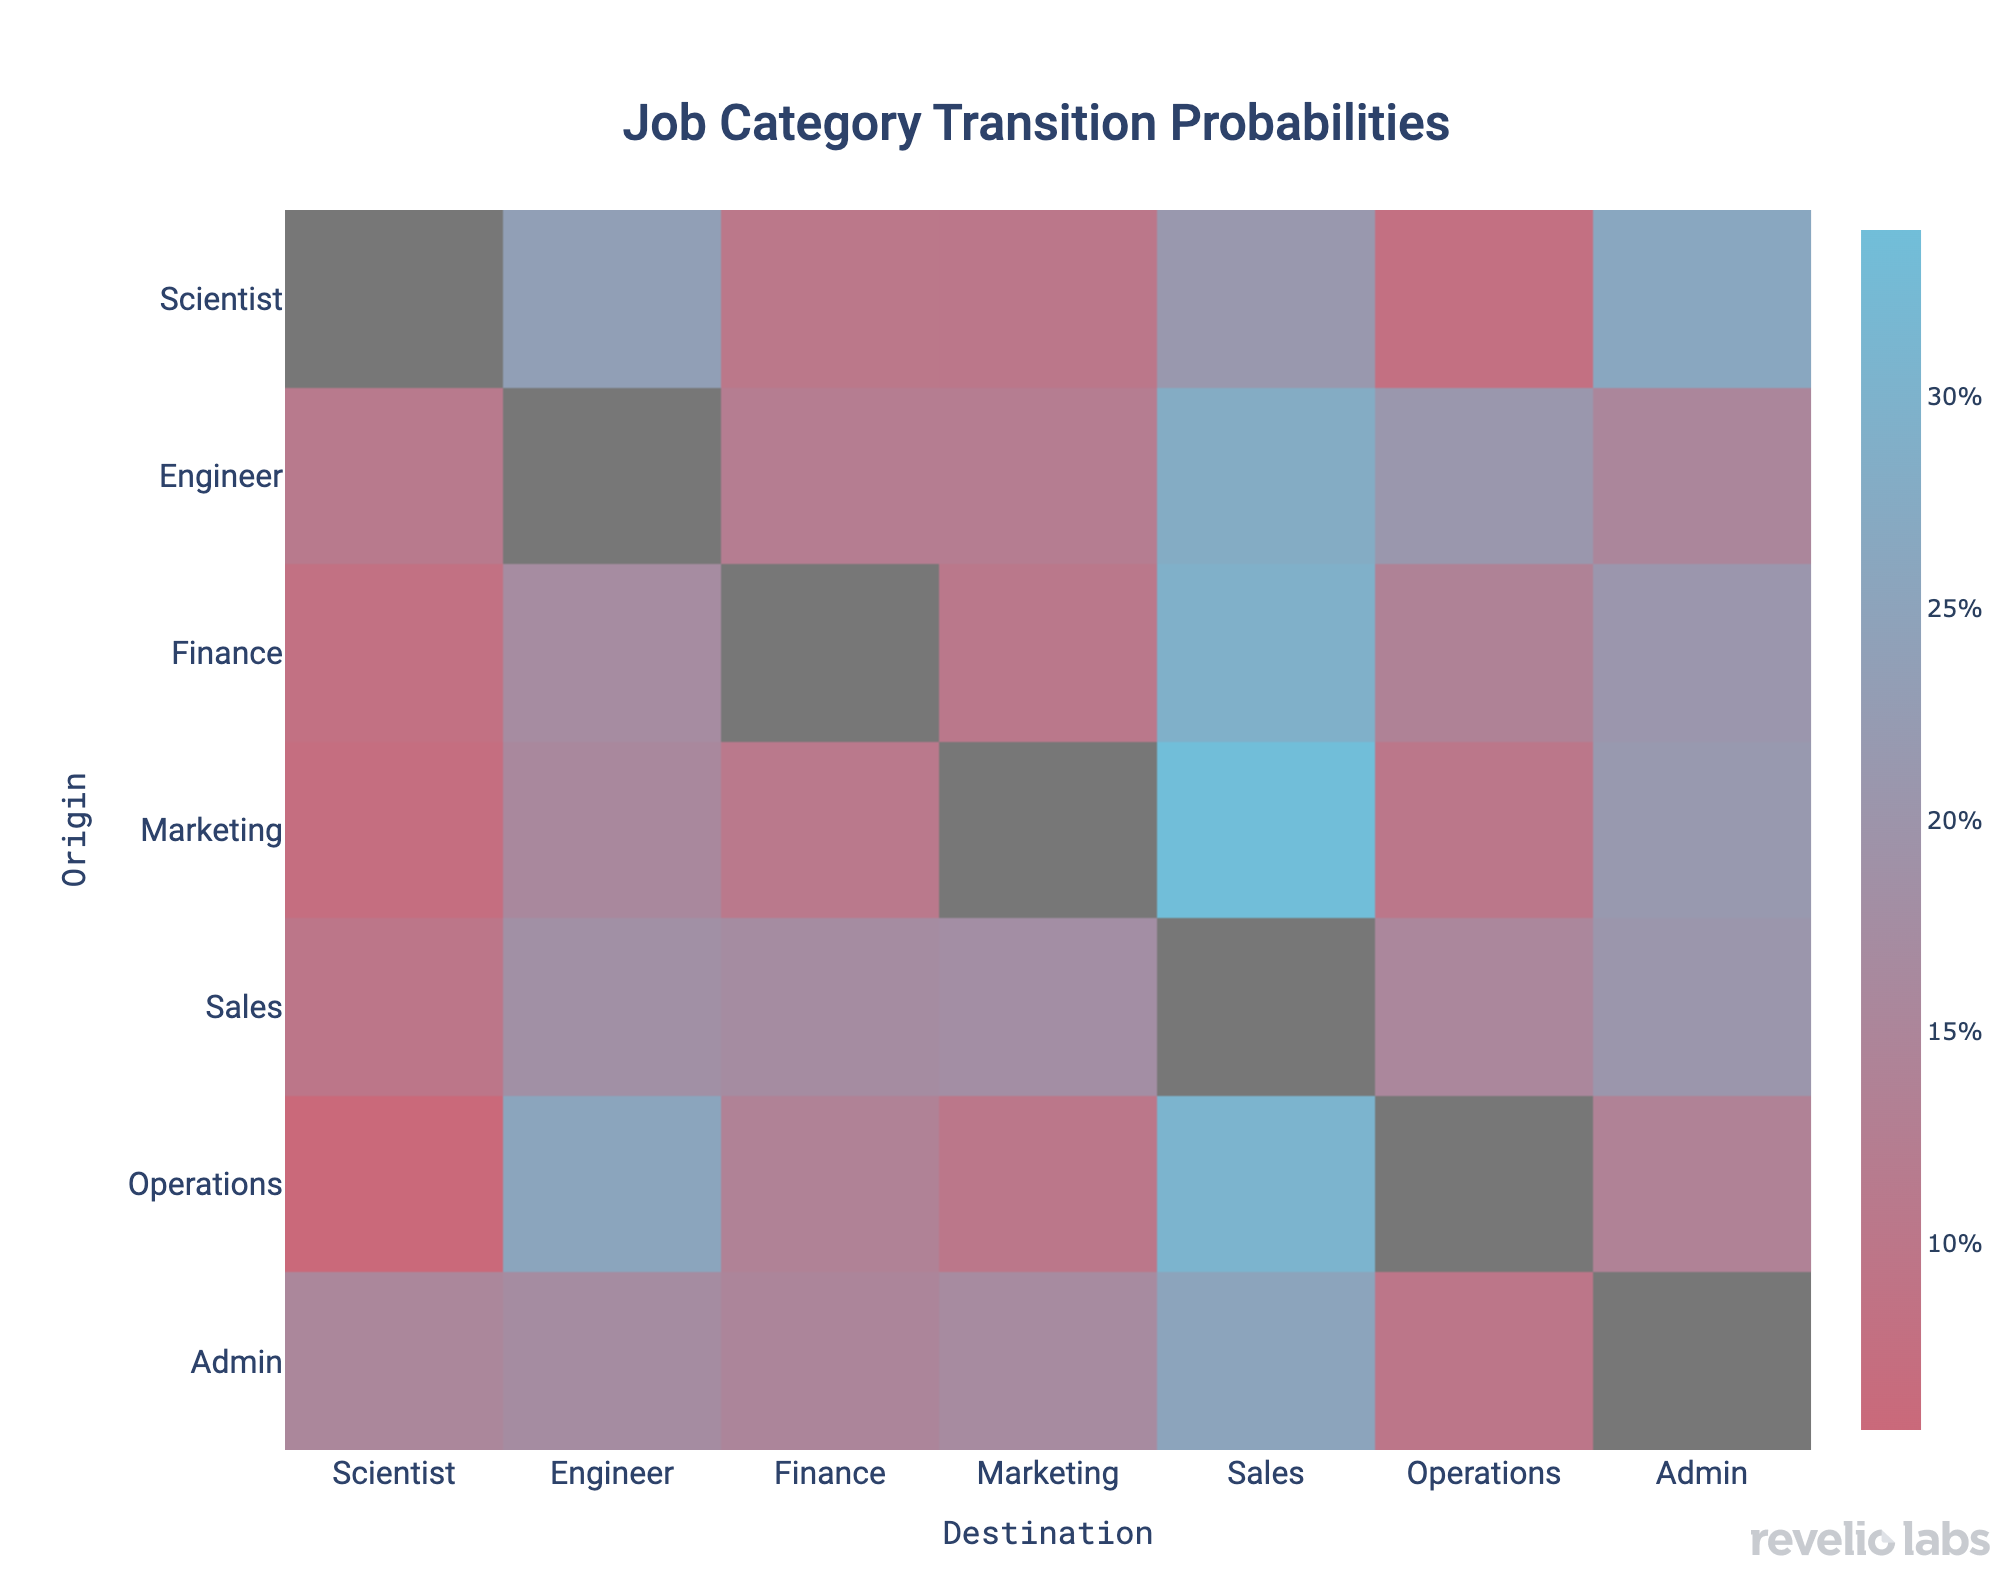 Job Category Transition Probabilities